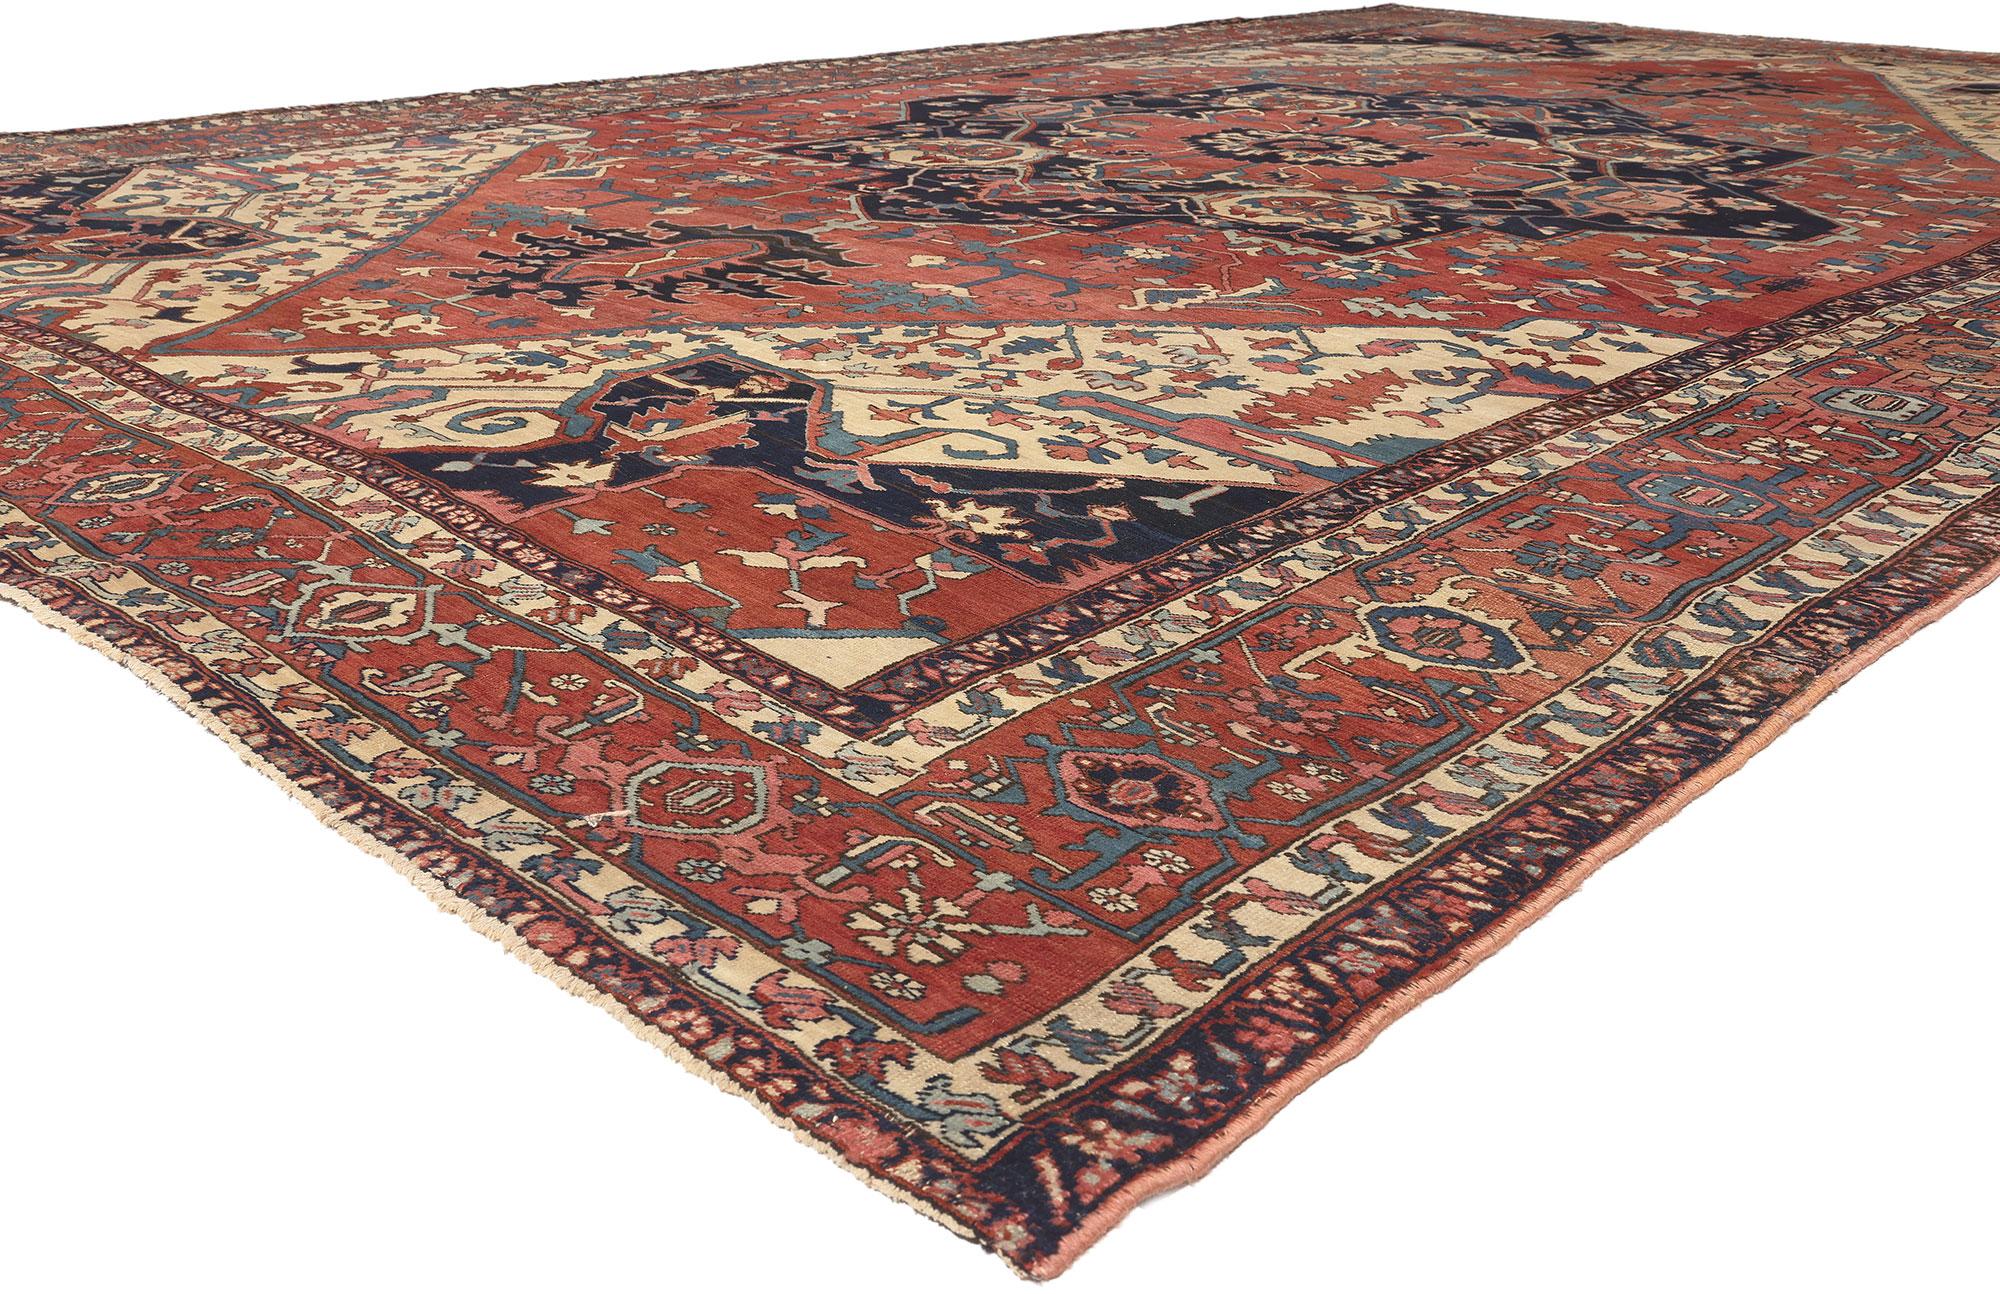 78650 Oversized Antique Persian Serapi Rug, 12'00 x 19'01.
Timeless appeal meets rustic charm in this hand knotted wool antique Persian Serapi rug. The intricate decorative detailing and sophisticated color palette woven into this piece work